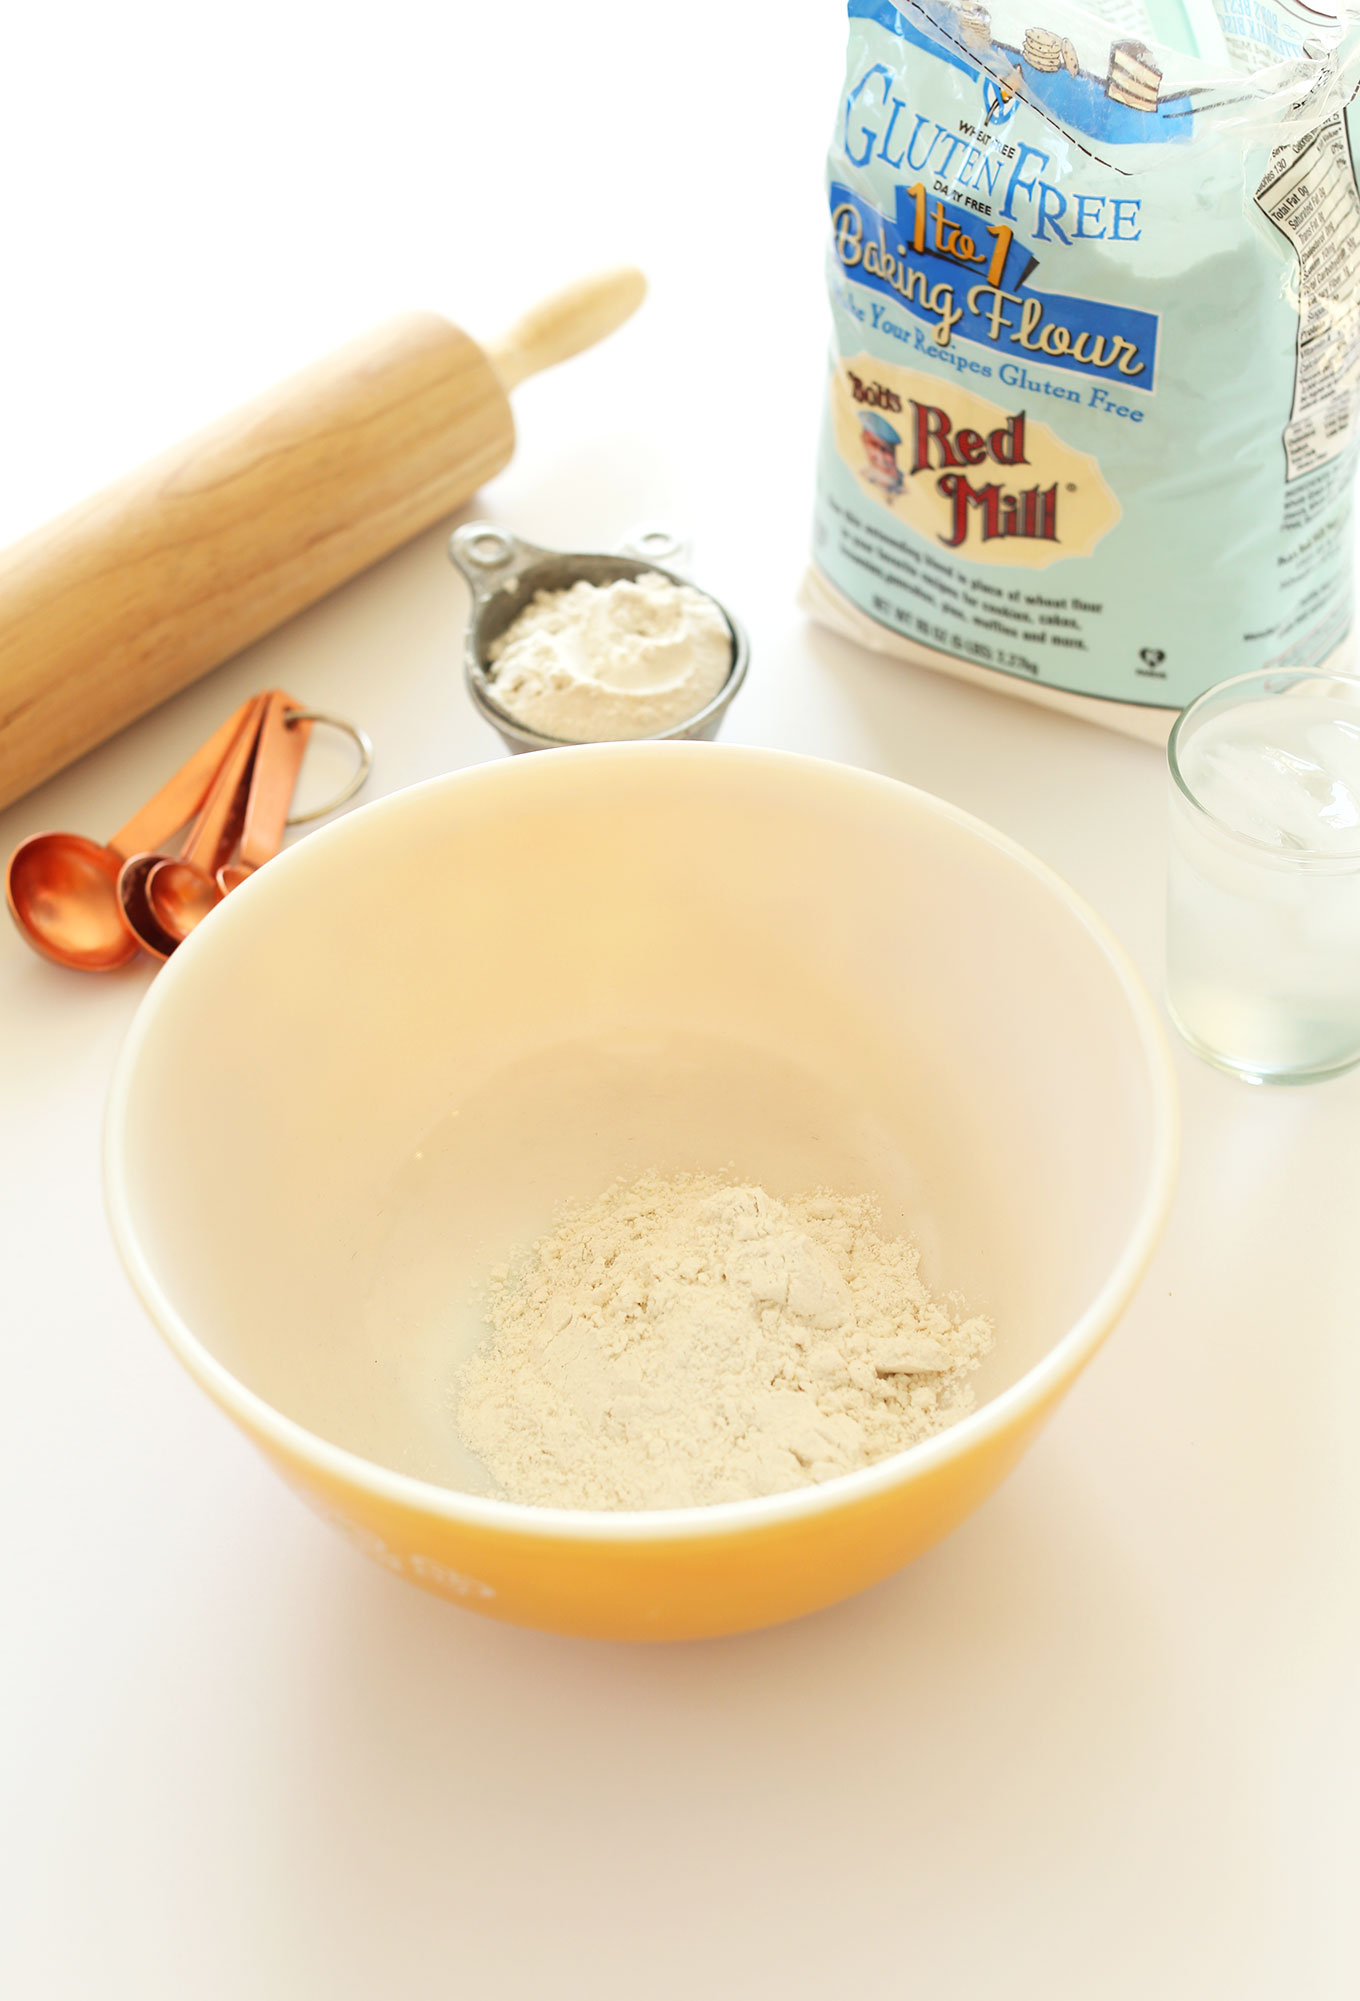 Bowl and measuring cup of Bob's Red Mill Gluten-Free Baking Flour next to a rolling pin and measuring spoons